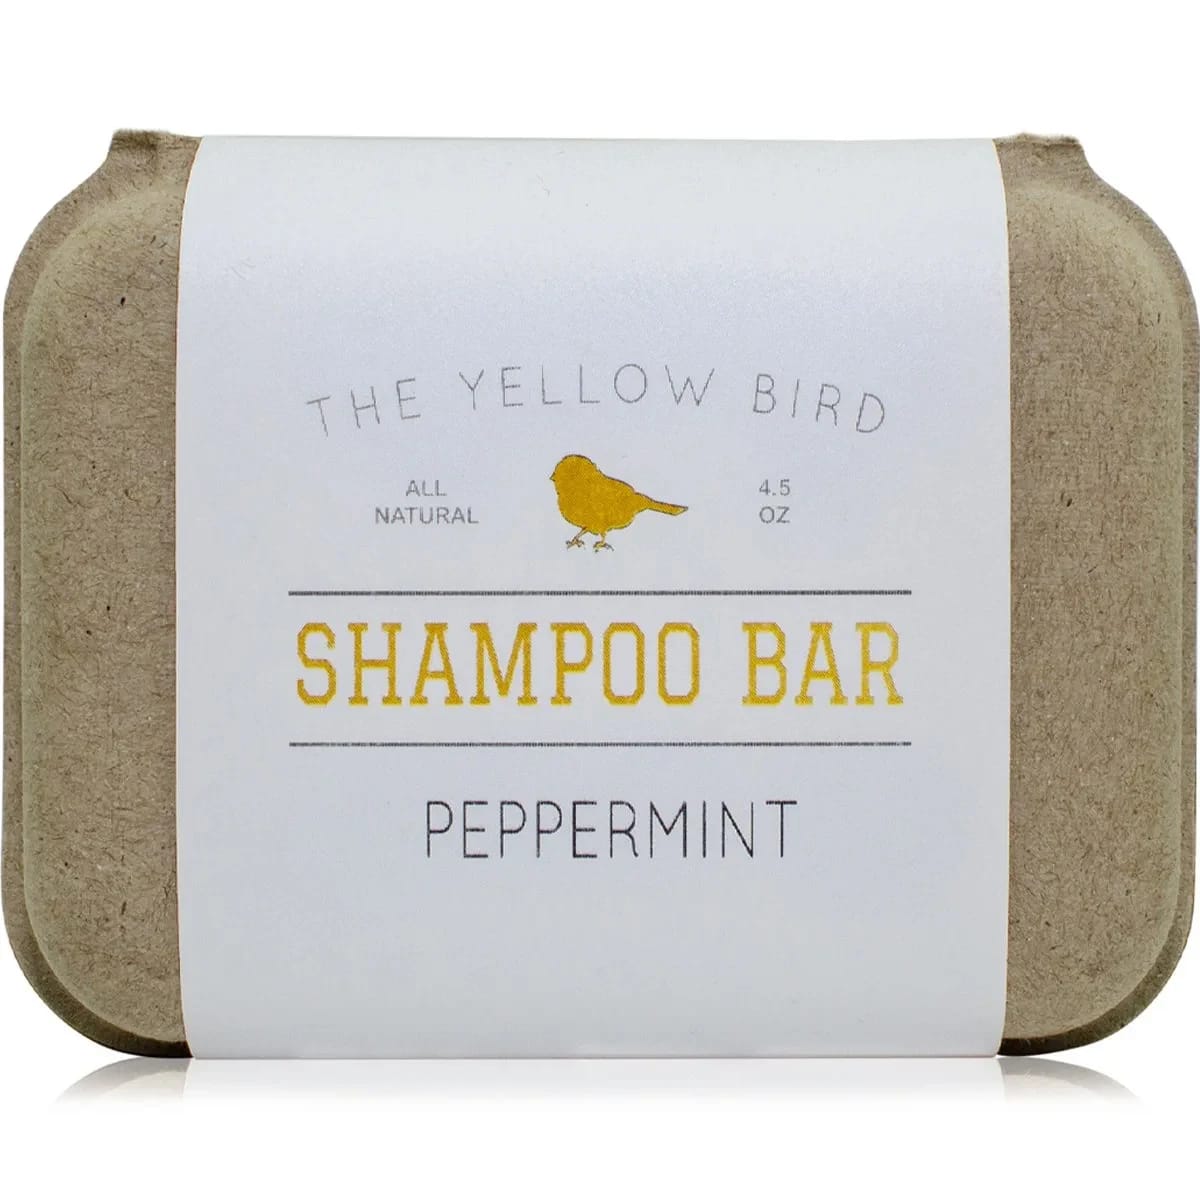 Peppermint Shampoo Bar Soap. Sulfate Free. Natural and Organic Ingredients. Anti Dandruff, Itchy Scalp, Psoriasis. Includes Conditioning Argan and Jojoba Oils.